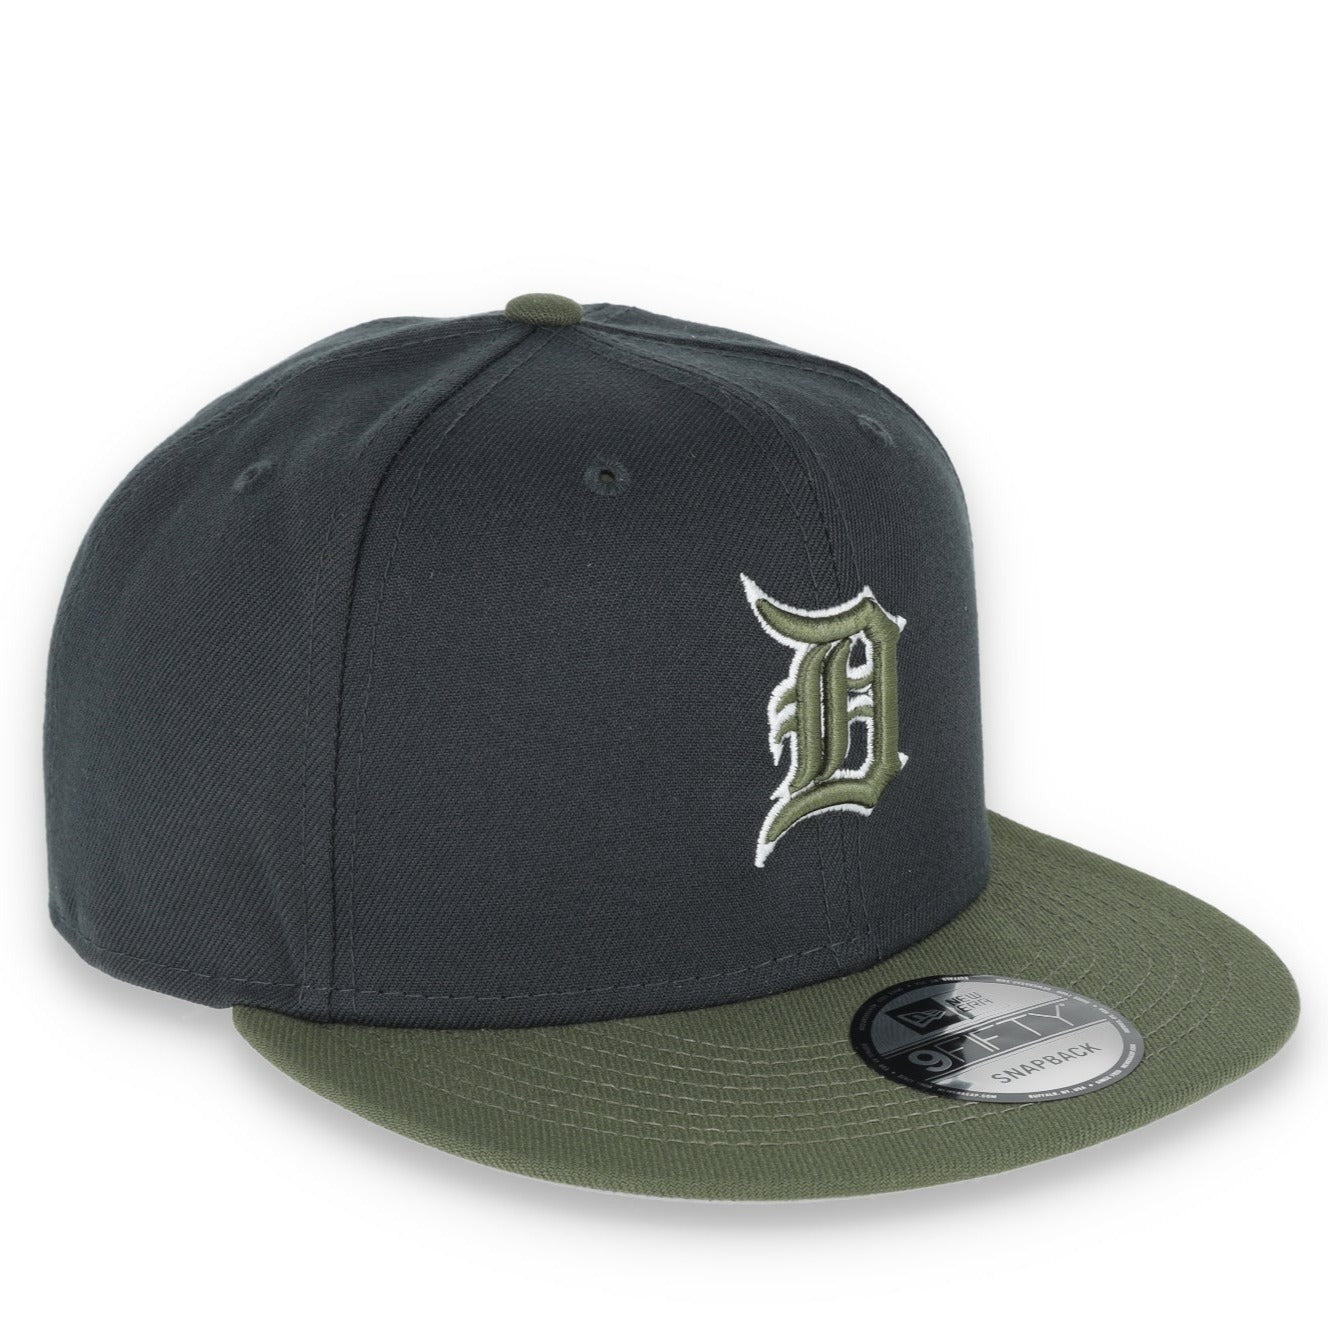 New Era Detroit Tigers 2-Tone Color Pack 9FIFTY Snapback Hat- Grey/Olive